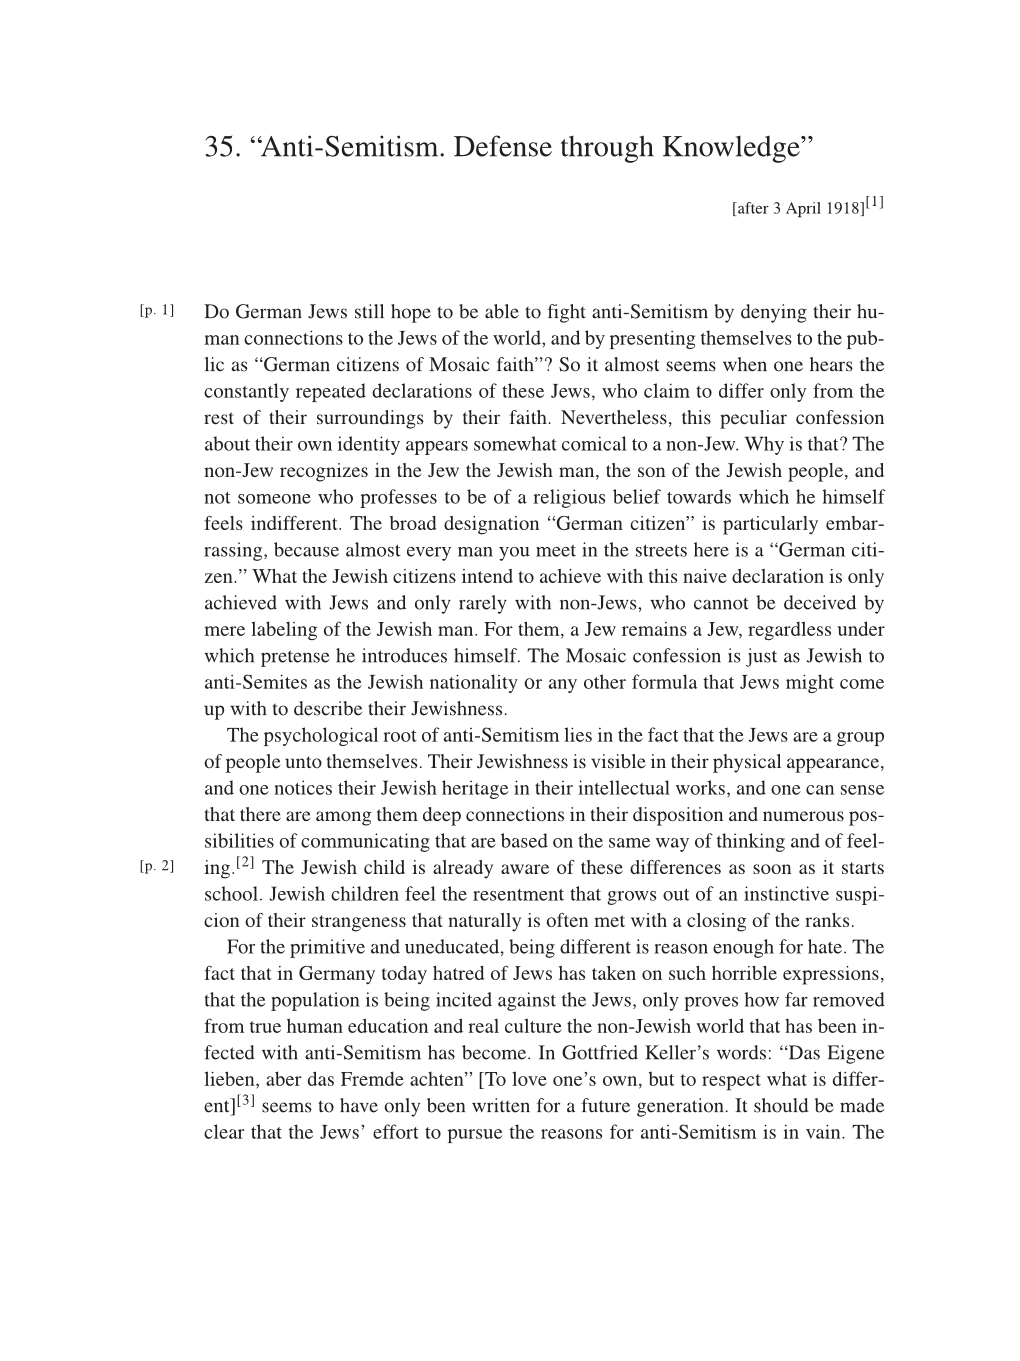 Volume 7: The Berlin Years: Writings, 1918-1921 (English translation supplement) page 156